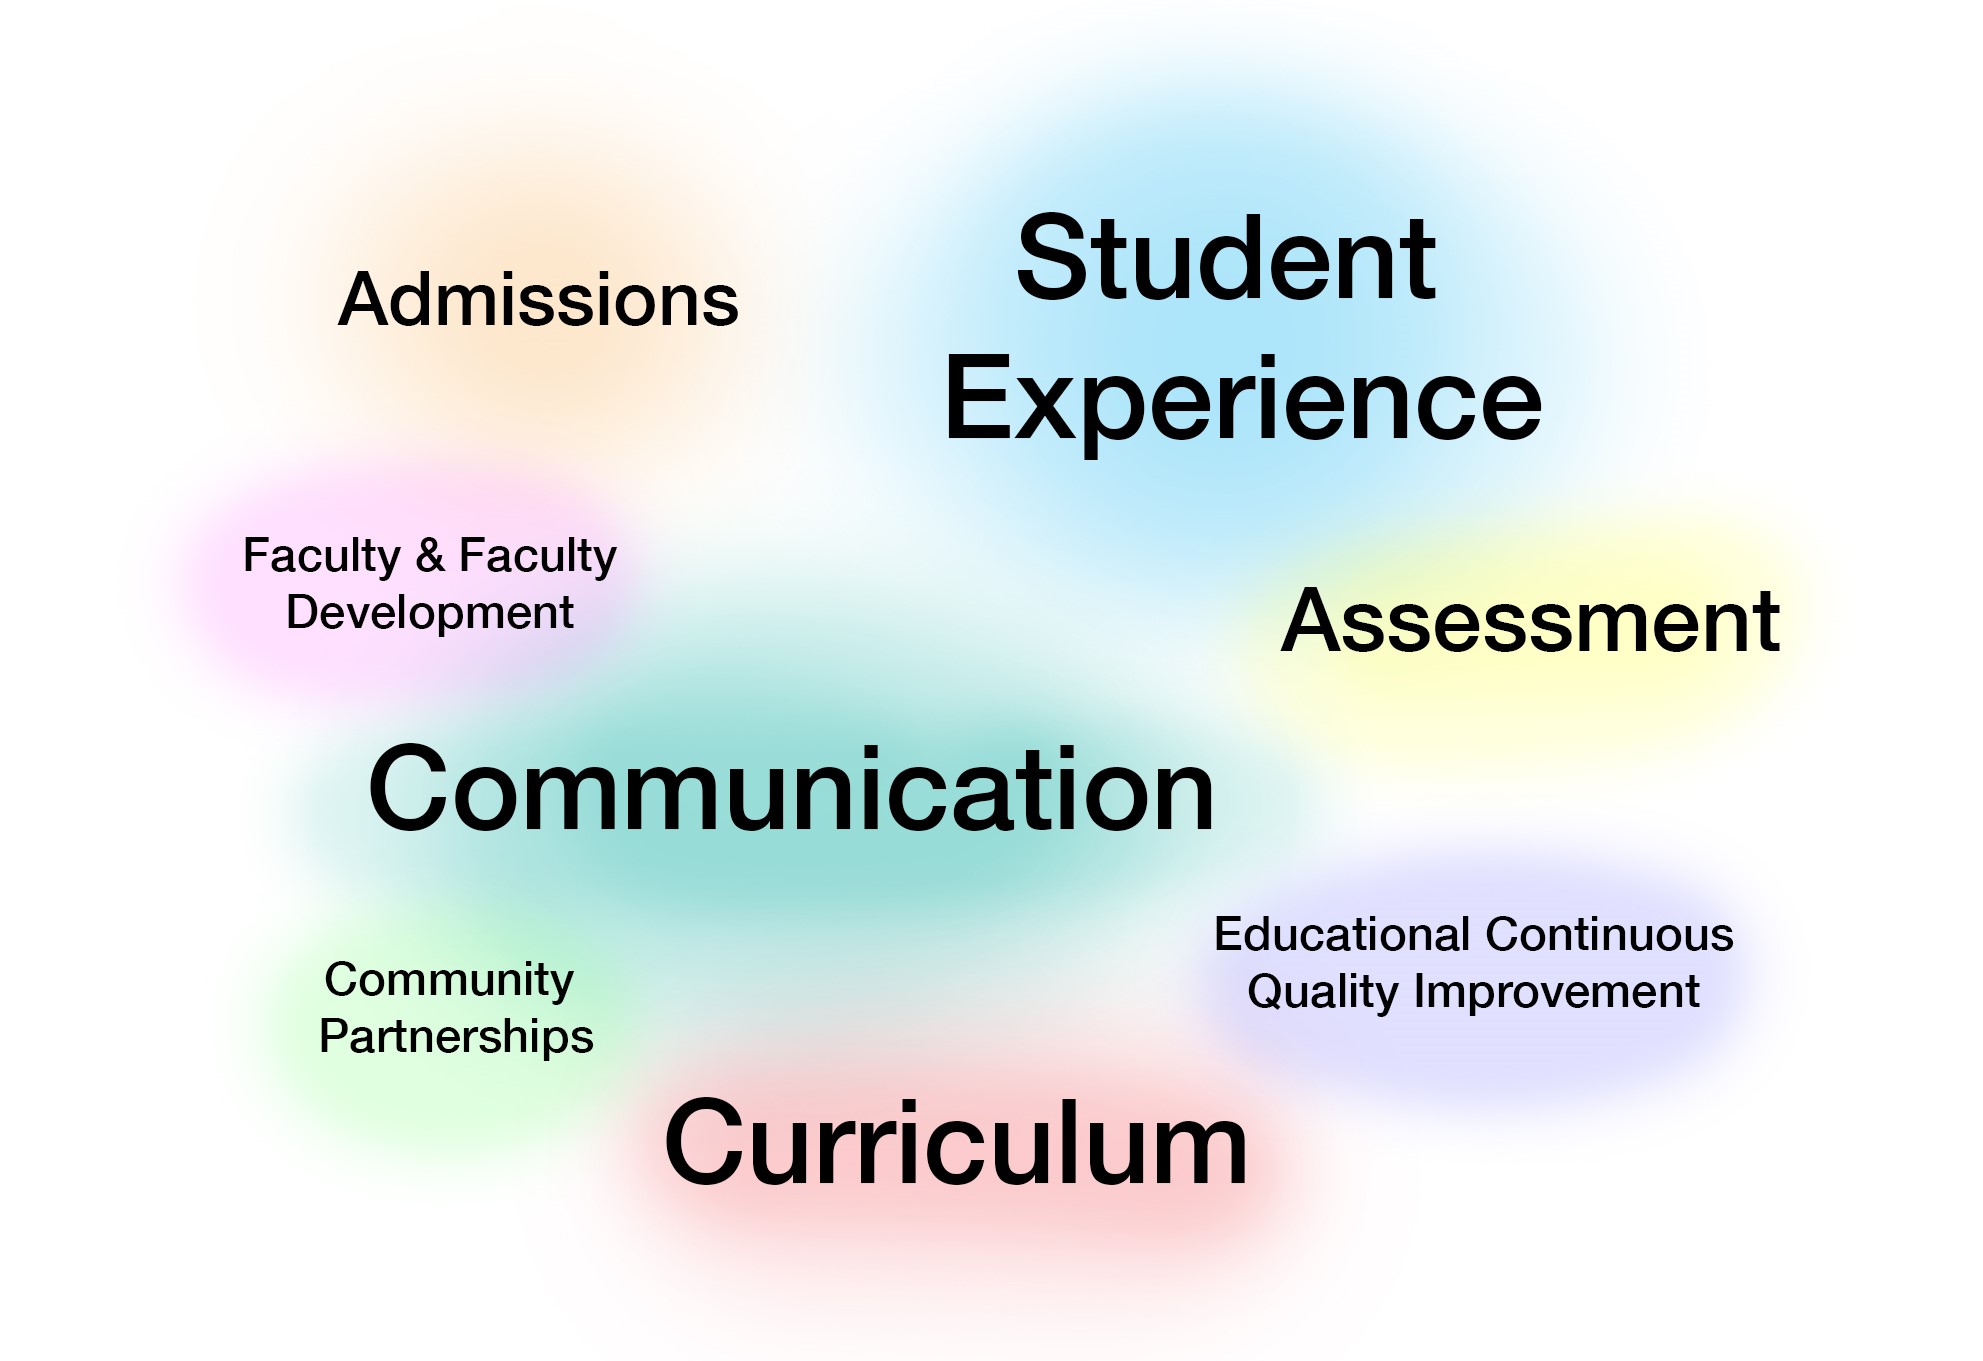 Graphic showing the components of medical education including: Student Experience, Assessment, Educational Continuous Quality Improvement, Curriculum, Communication, Community Partnerships, Admissions, and Faculty and Faculty Development